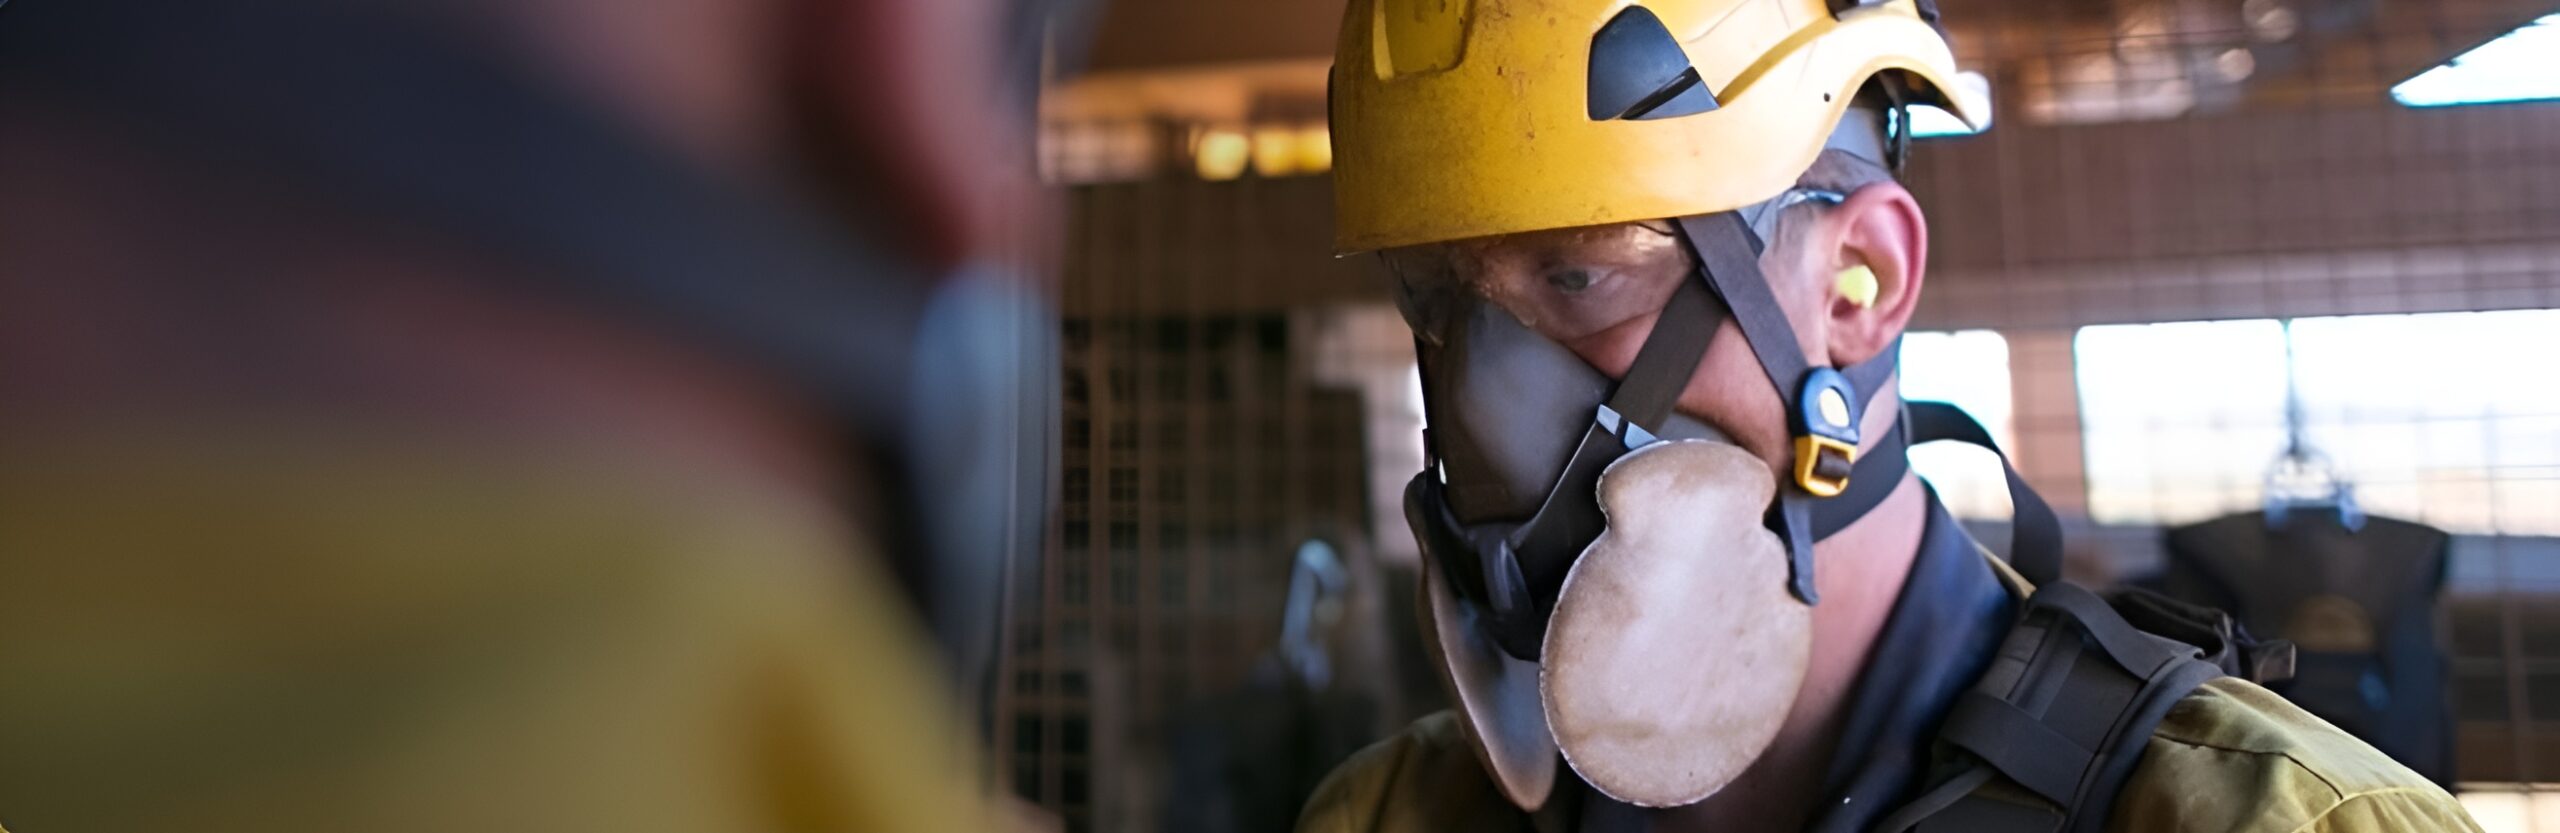 landscape of face of man in warehouse wearing PPE including hard hat and a respirator